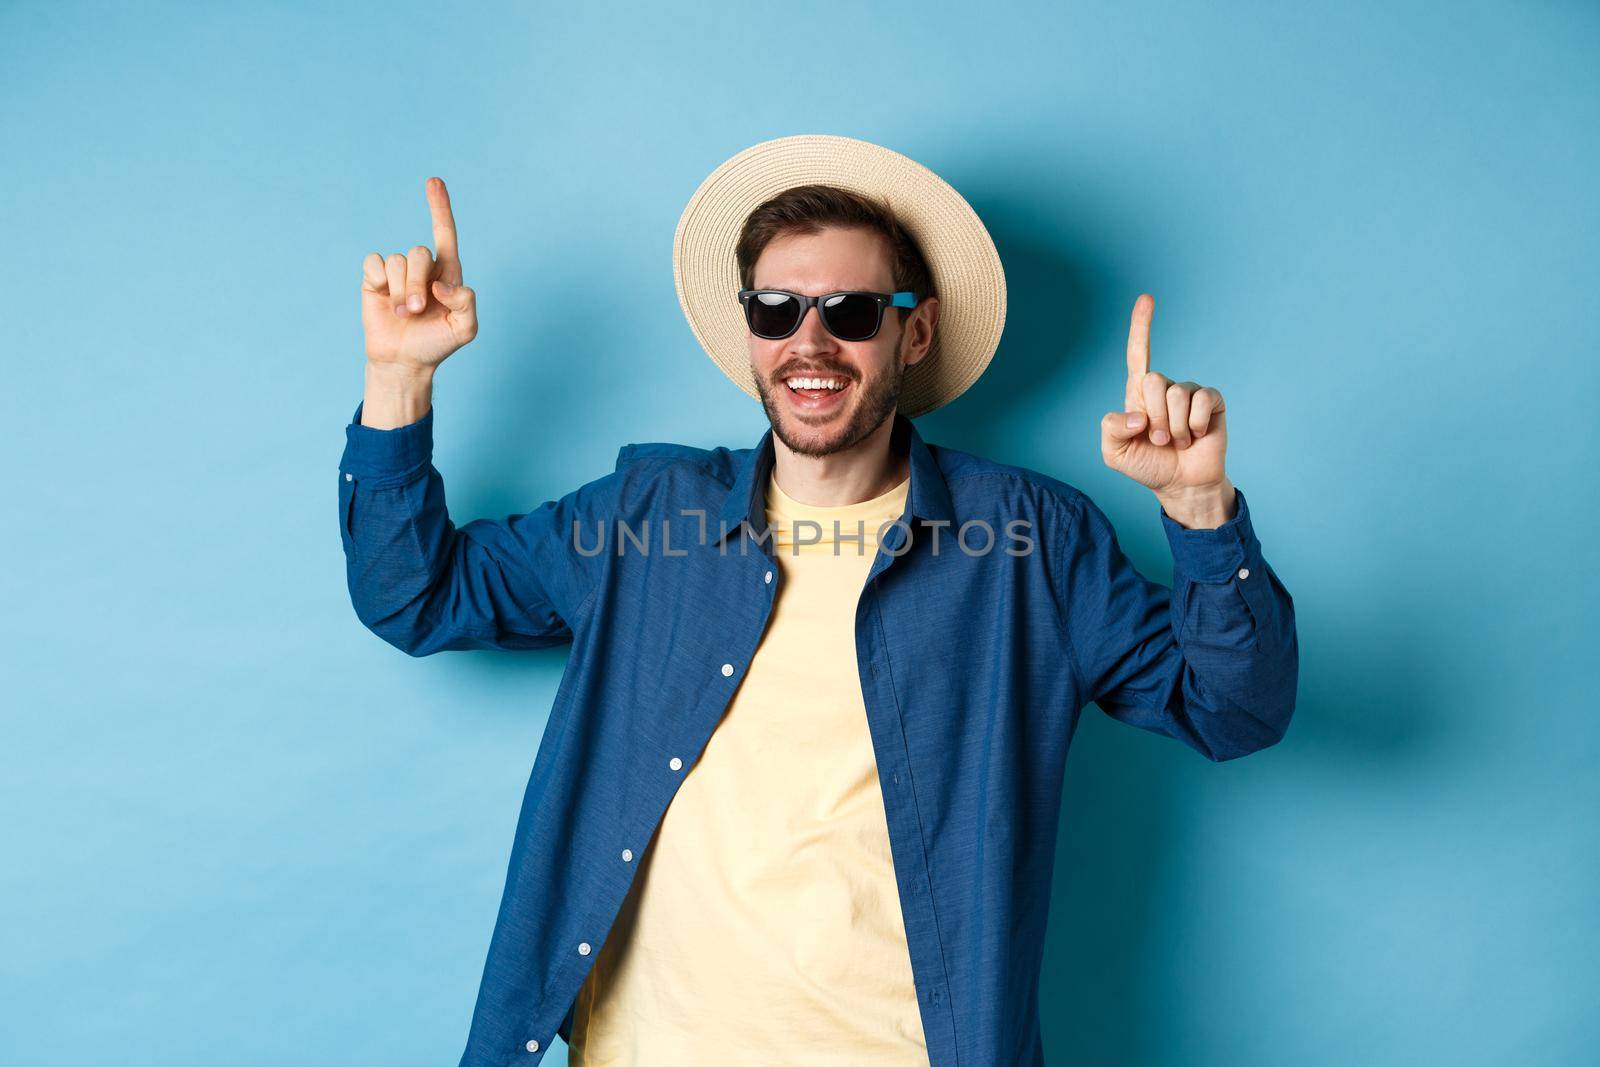 Cheerful caucasian guy in straw hat and sunglasses, dancing and having fun on vacation, standing over blue background. Concept of summer tourism.